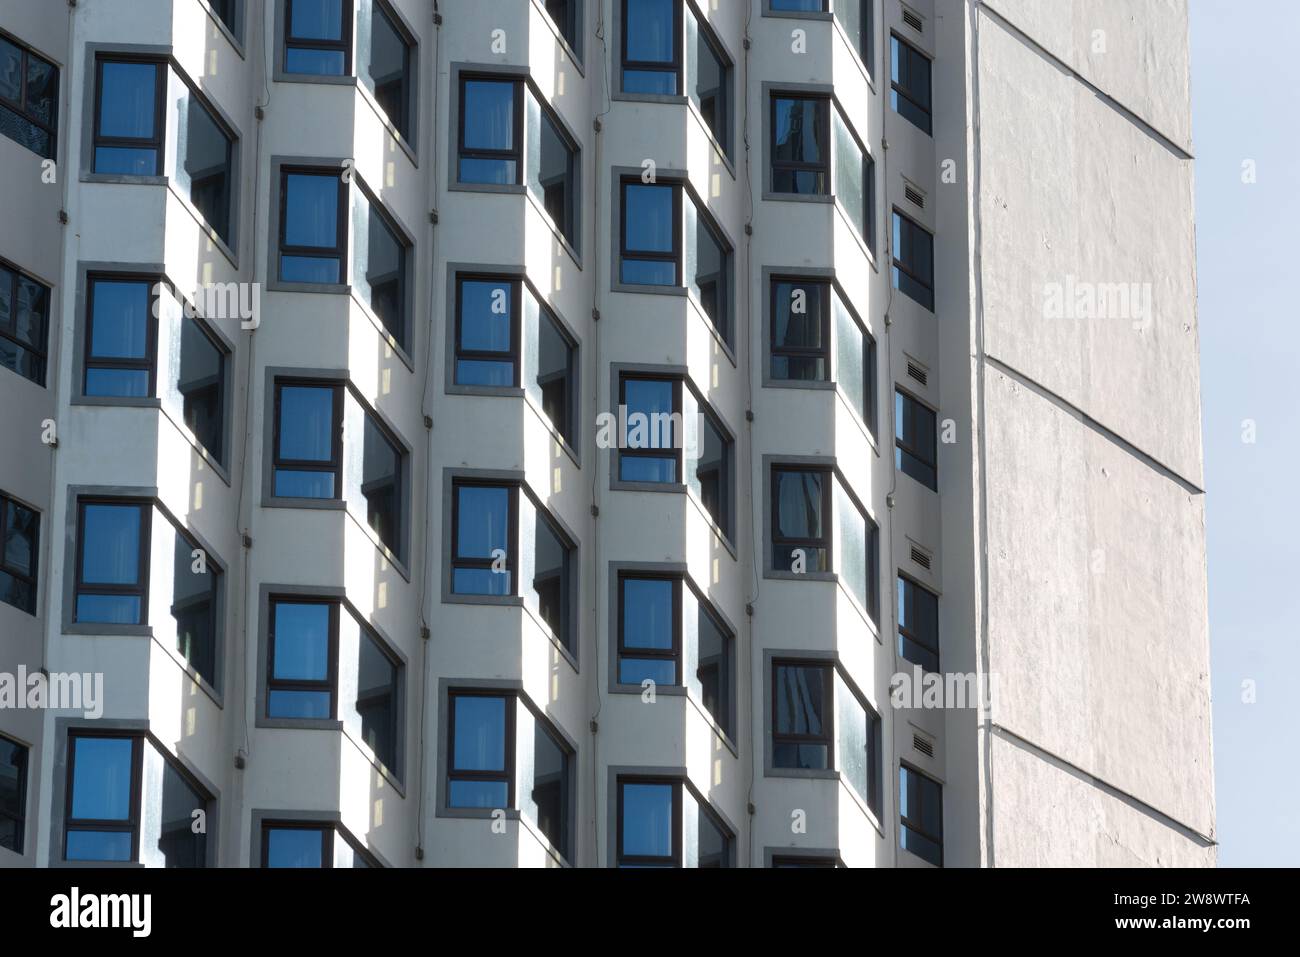 Closeup of multistory building with rows of windows. Stock Photo